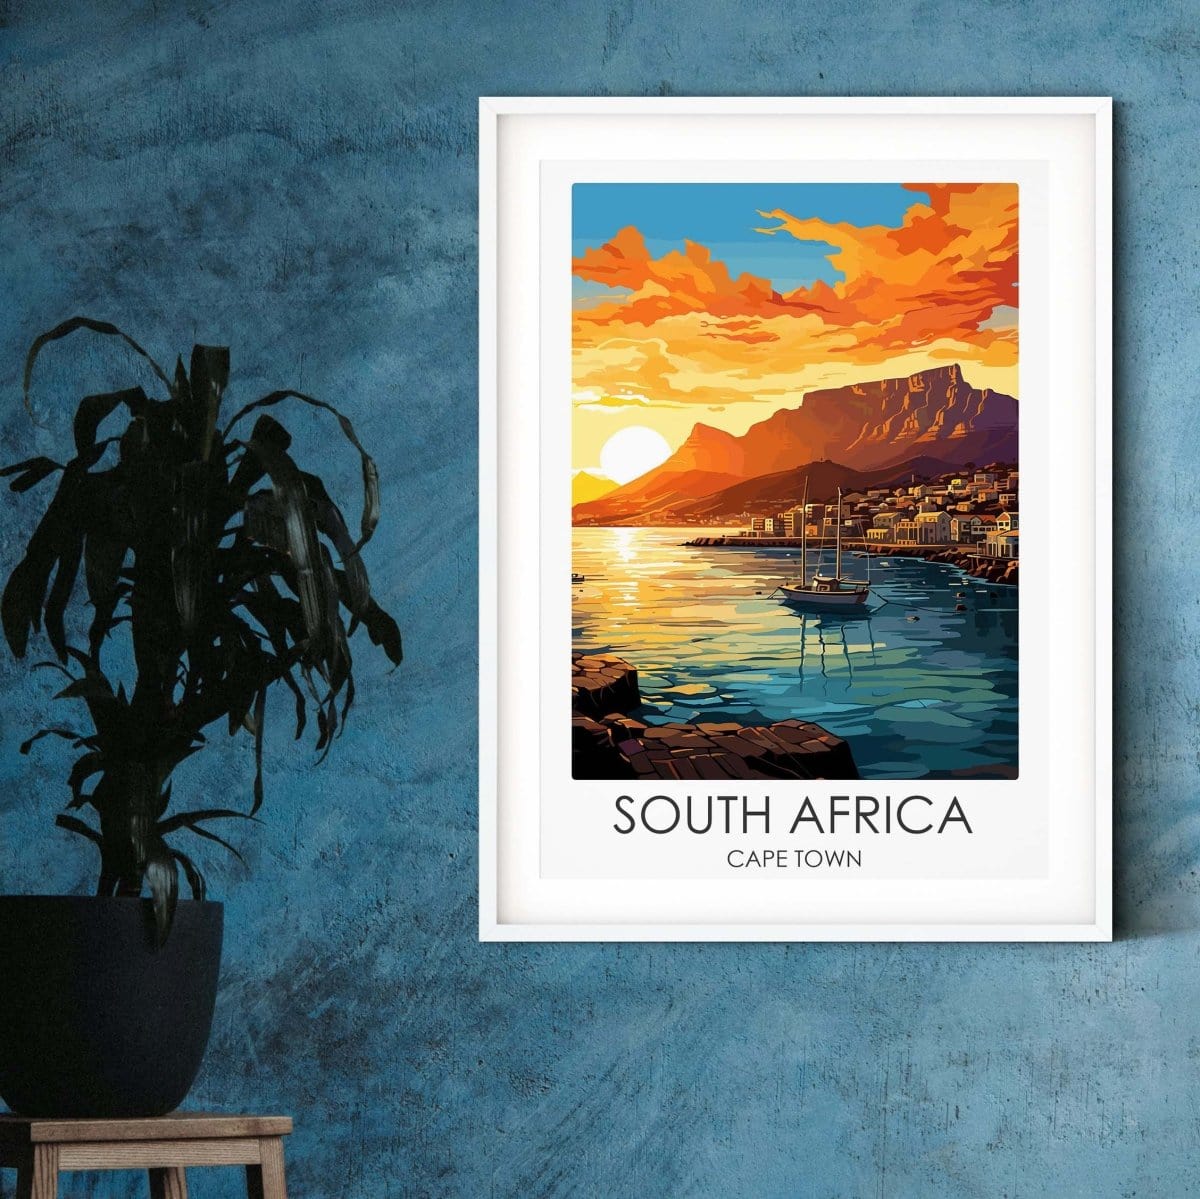 South Africa Cape Town modern travel print graphic travel poster